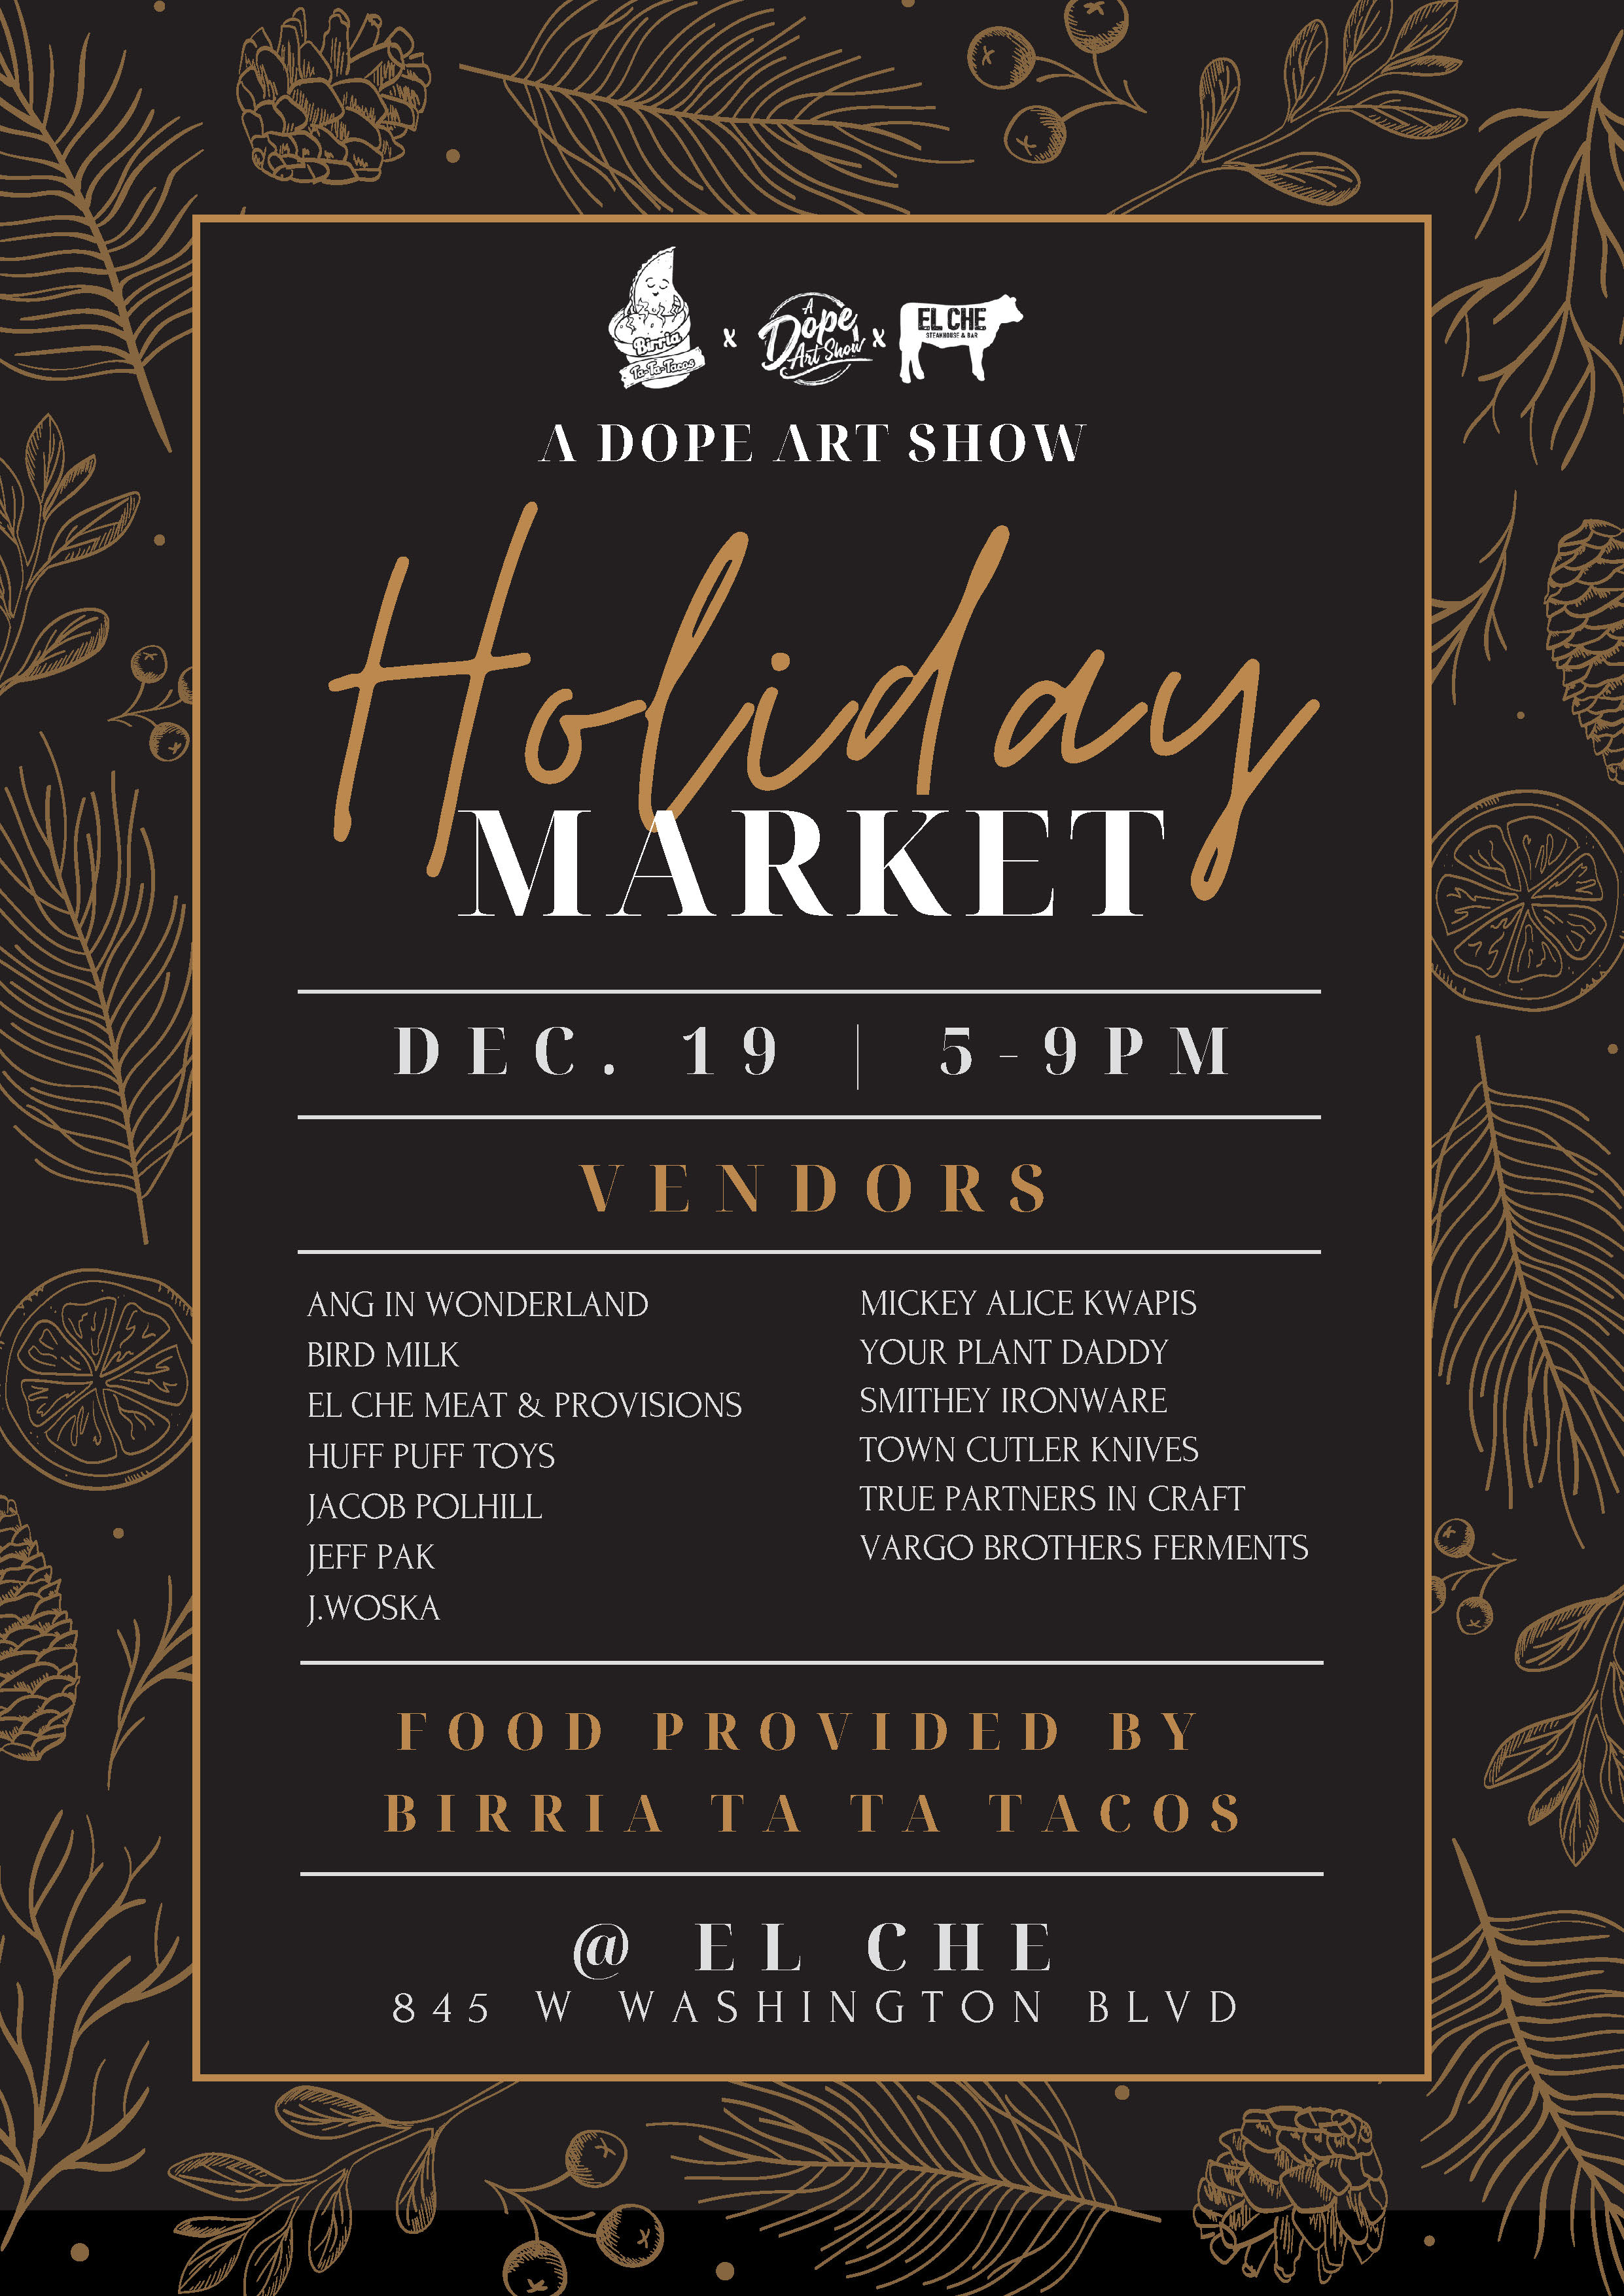 El Che Steakhouse & Bar Hosts Dope Art Show For Special Holiday Market with  Local Makers, Dec. 19 | Chicago Food Magazine